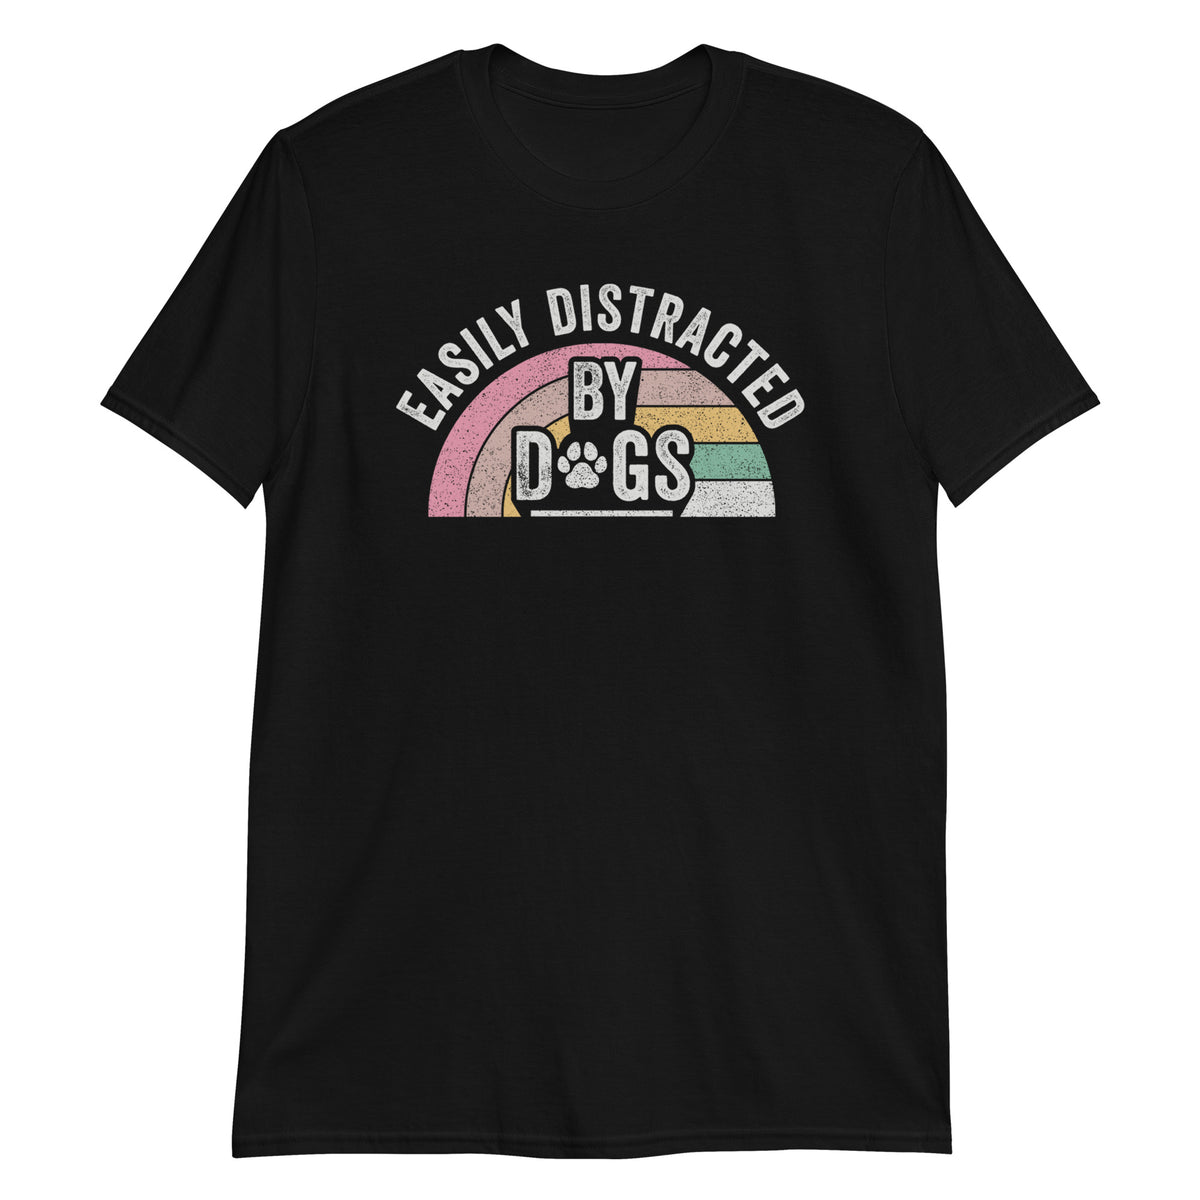 Easily Distracted By Dogs Funny Dog Lover Retro Vintage T-shirt